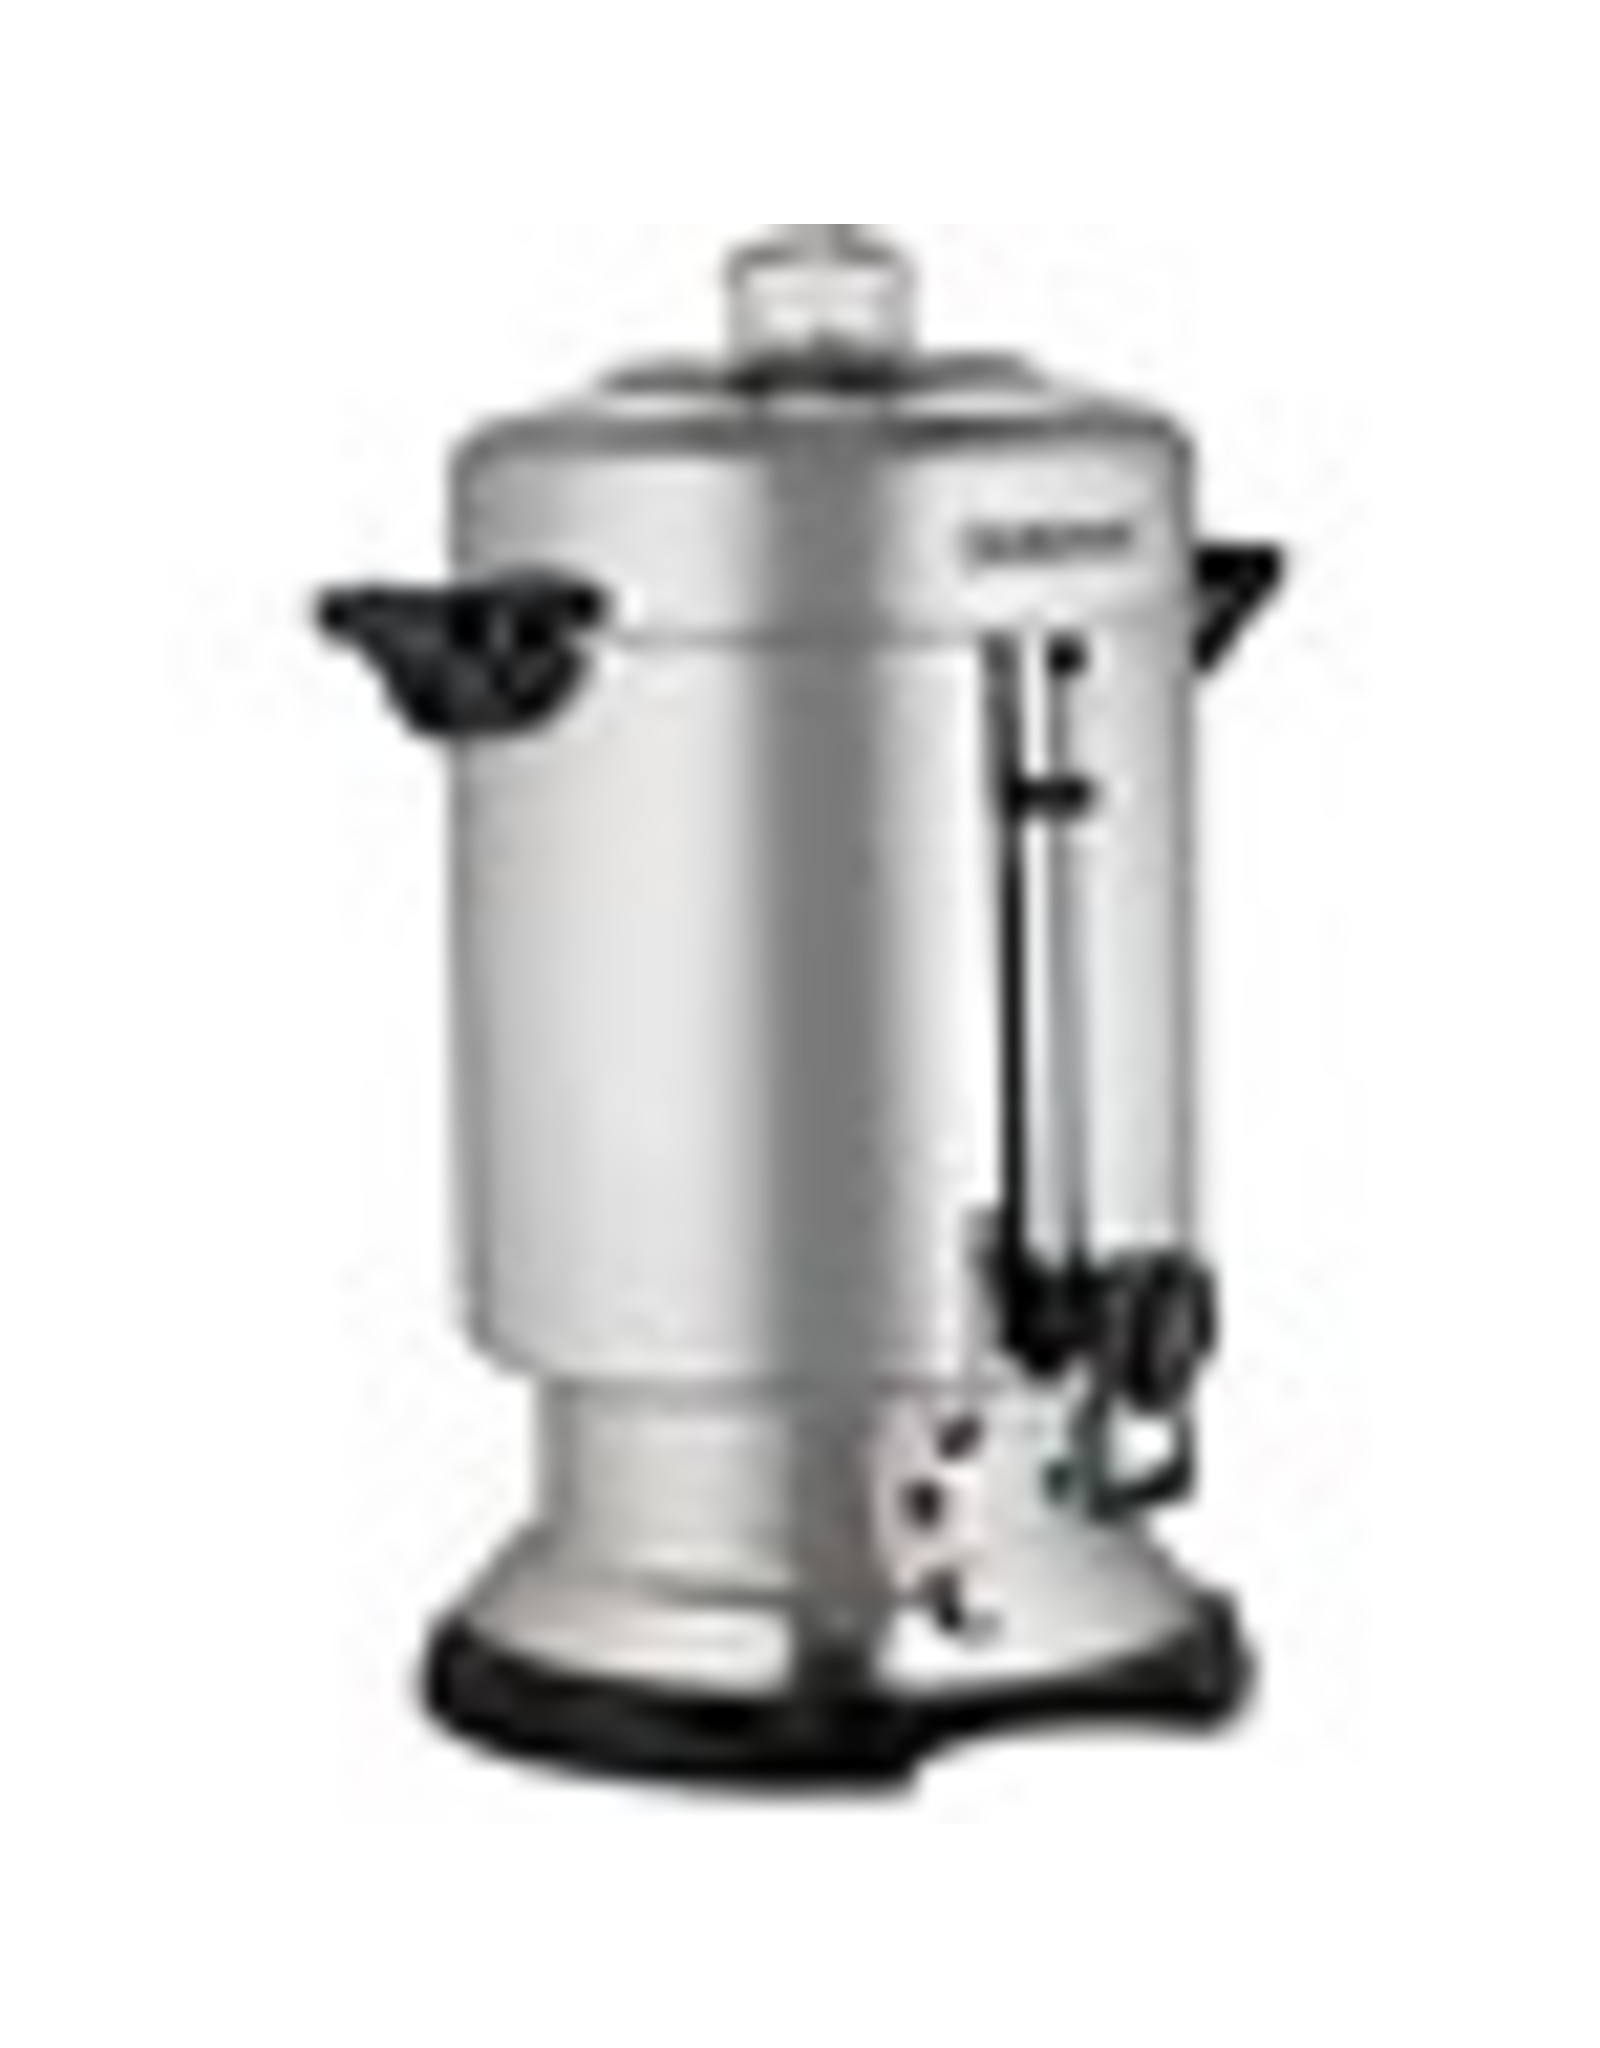 COFFEE URN 60 CUPS STNLESS STL